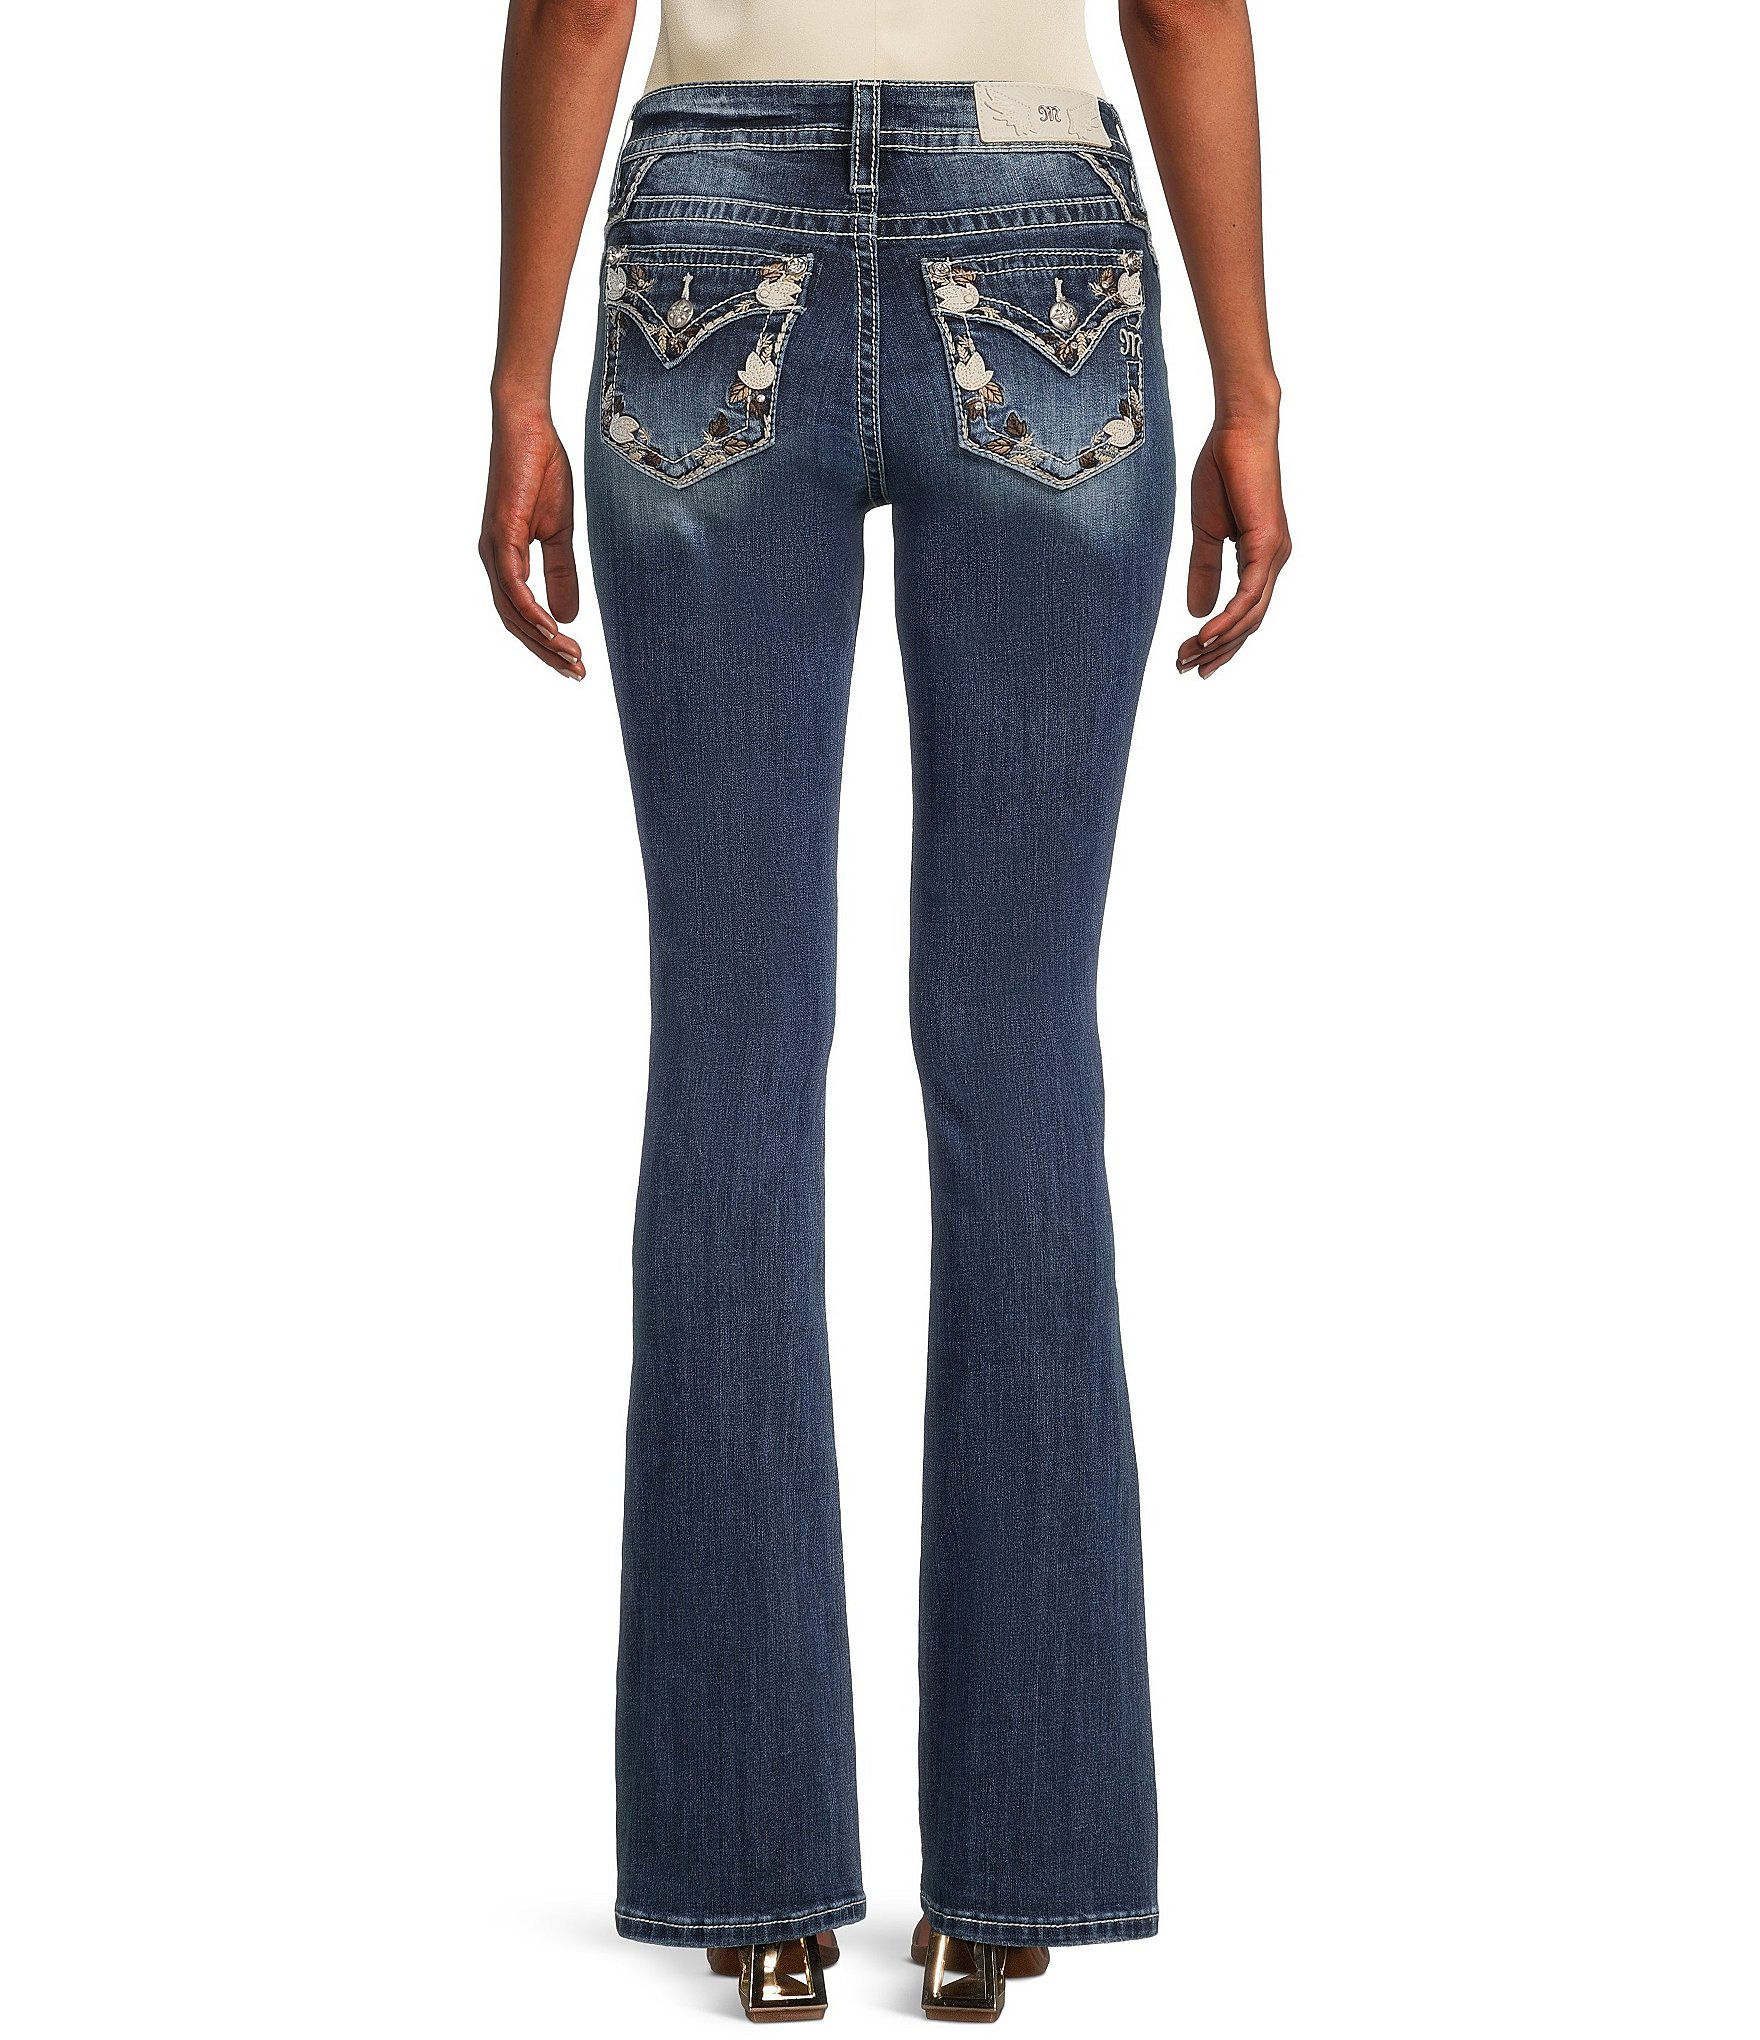 Miss Me Feather & Floral Bootcut Jeans